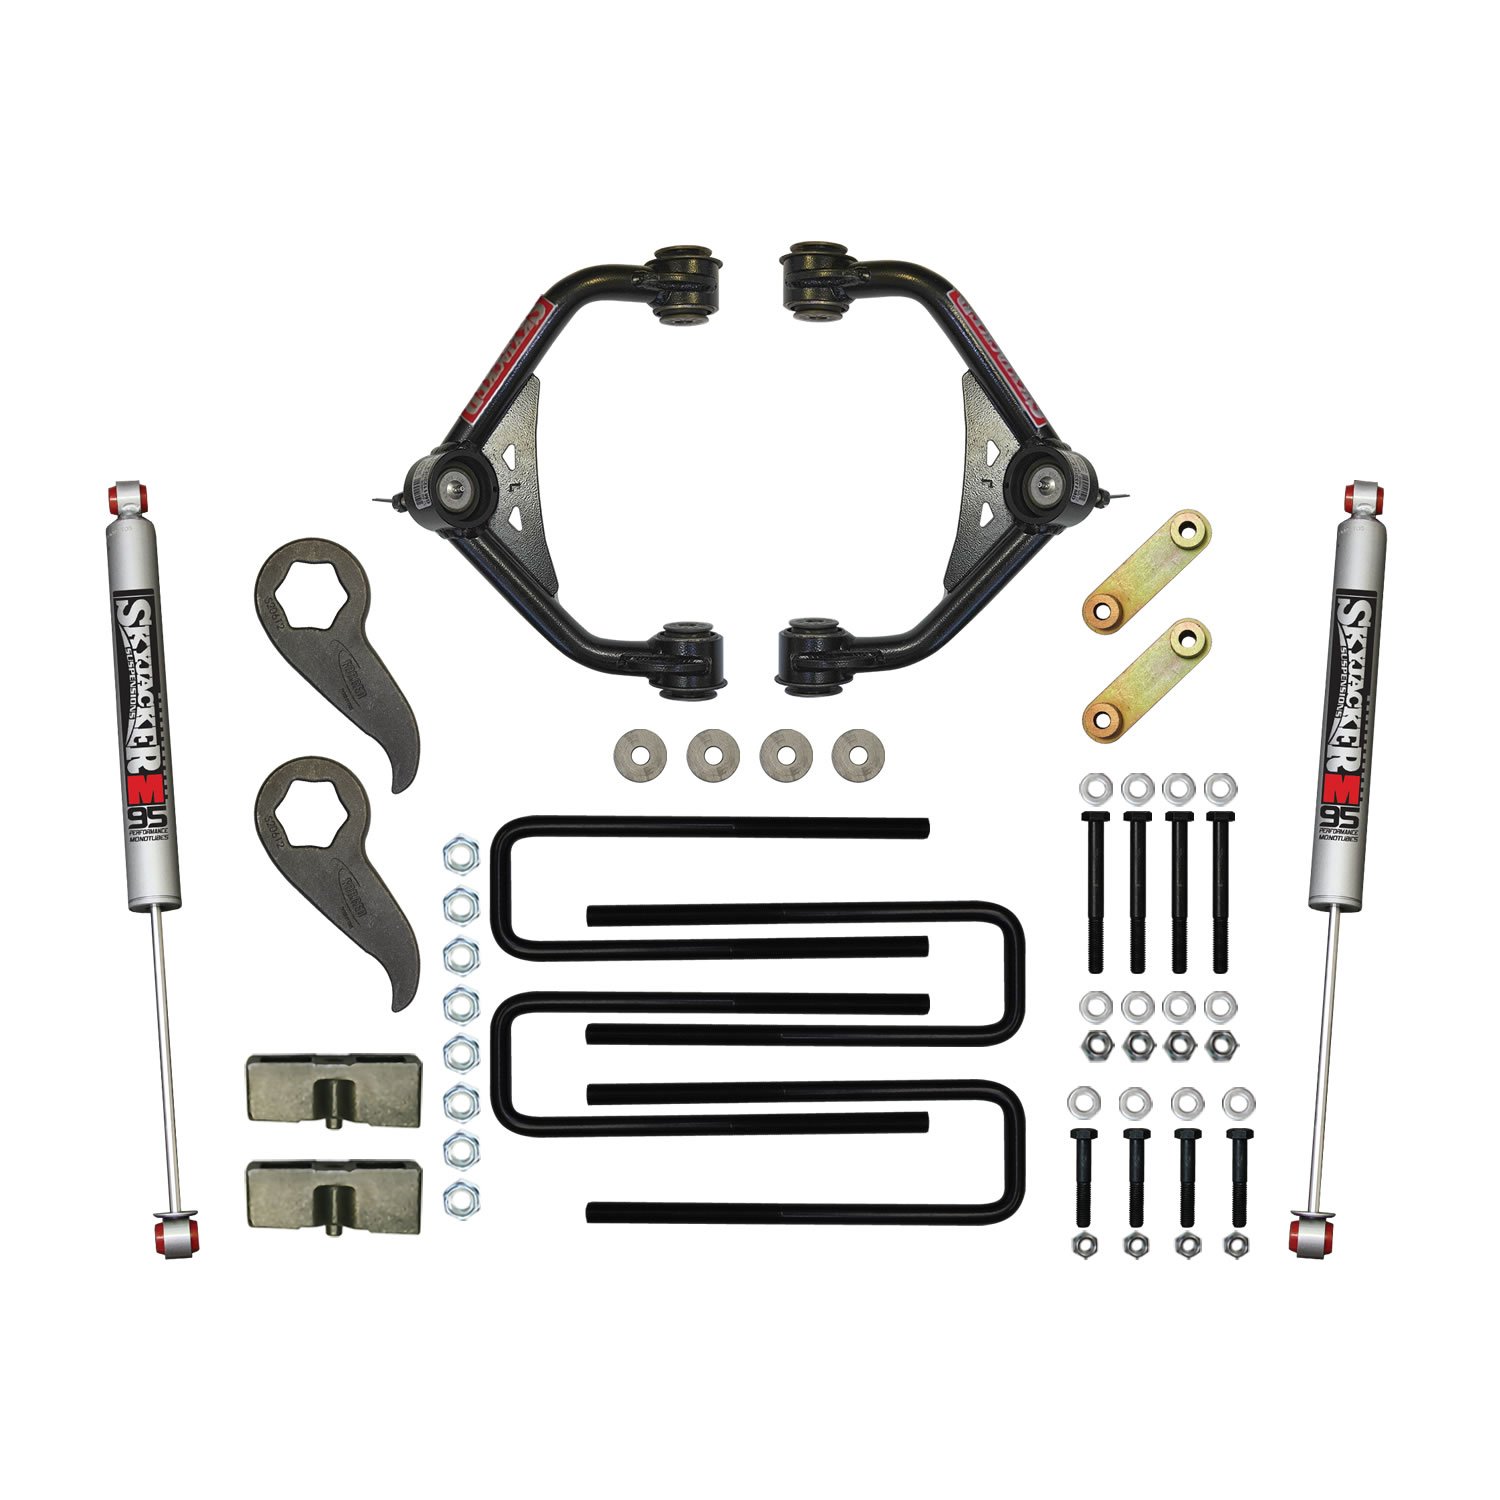 3.000-3.500 In. Upper Control Arm Lift Kit with M9500 Rear Shocks